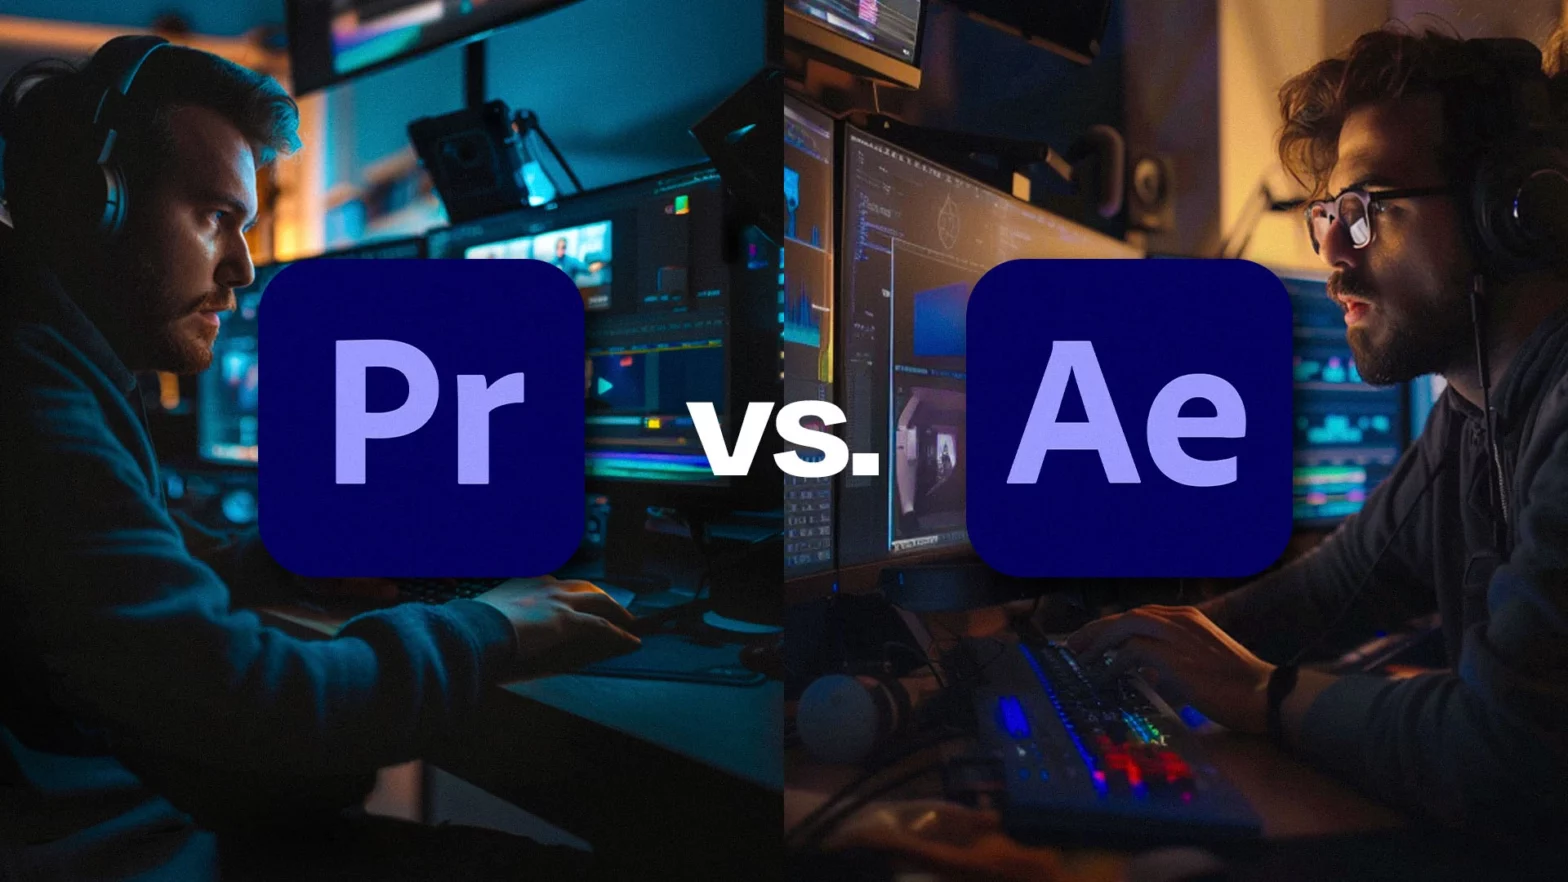 After Effects vs. Premiere Pro